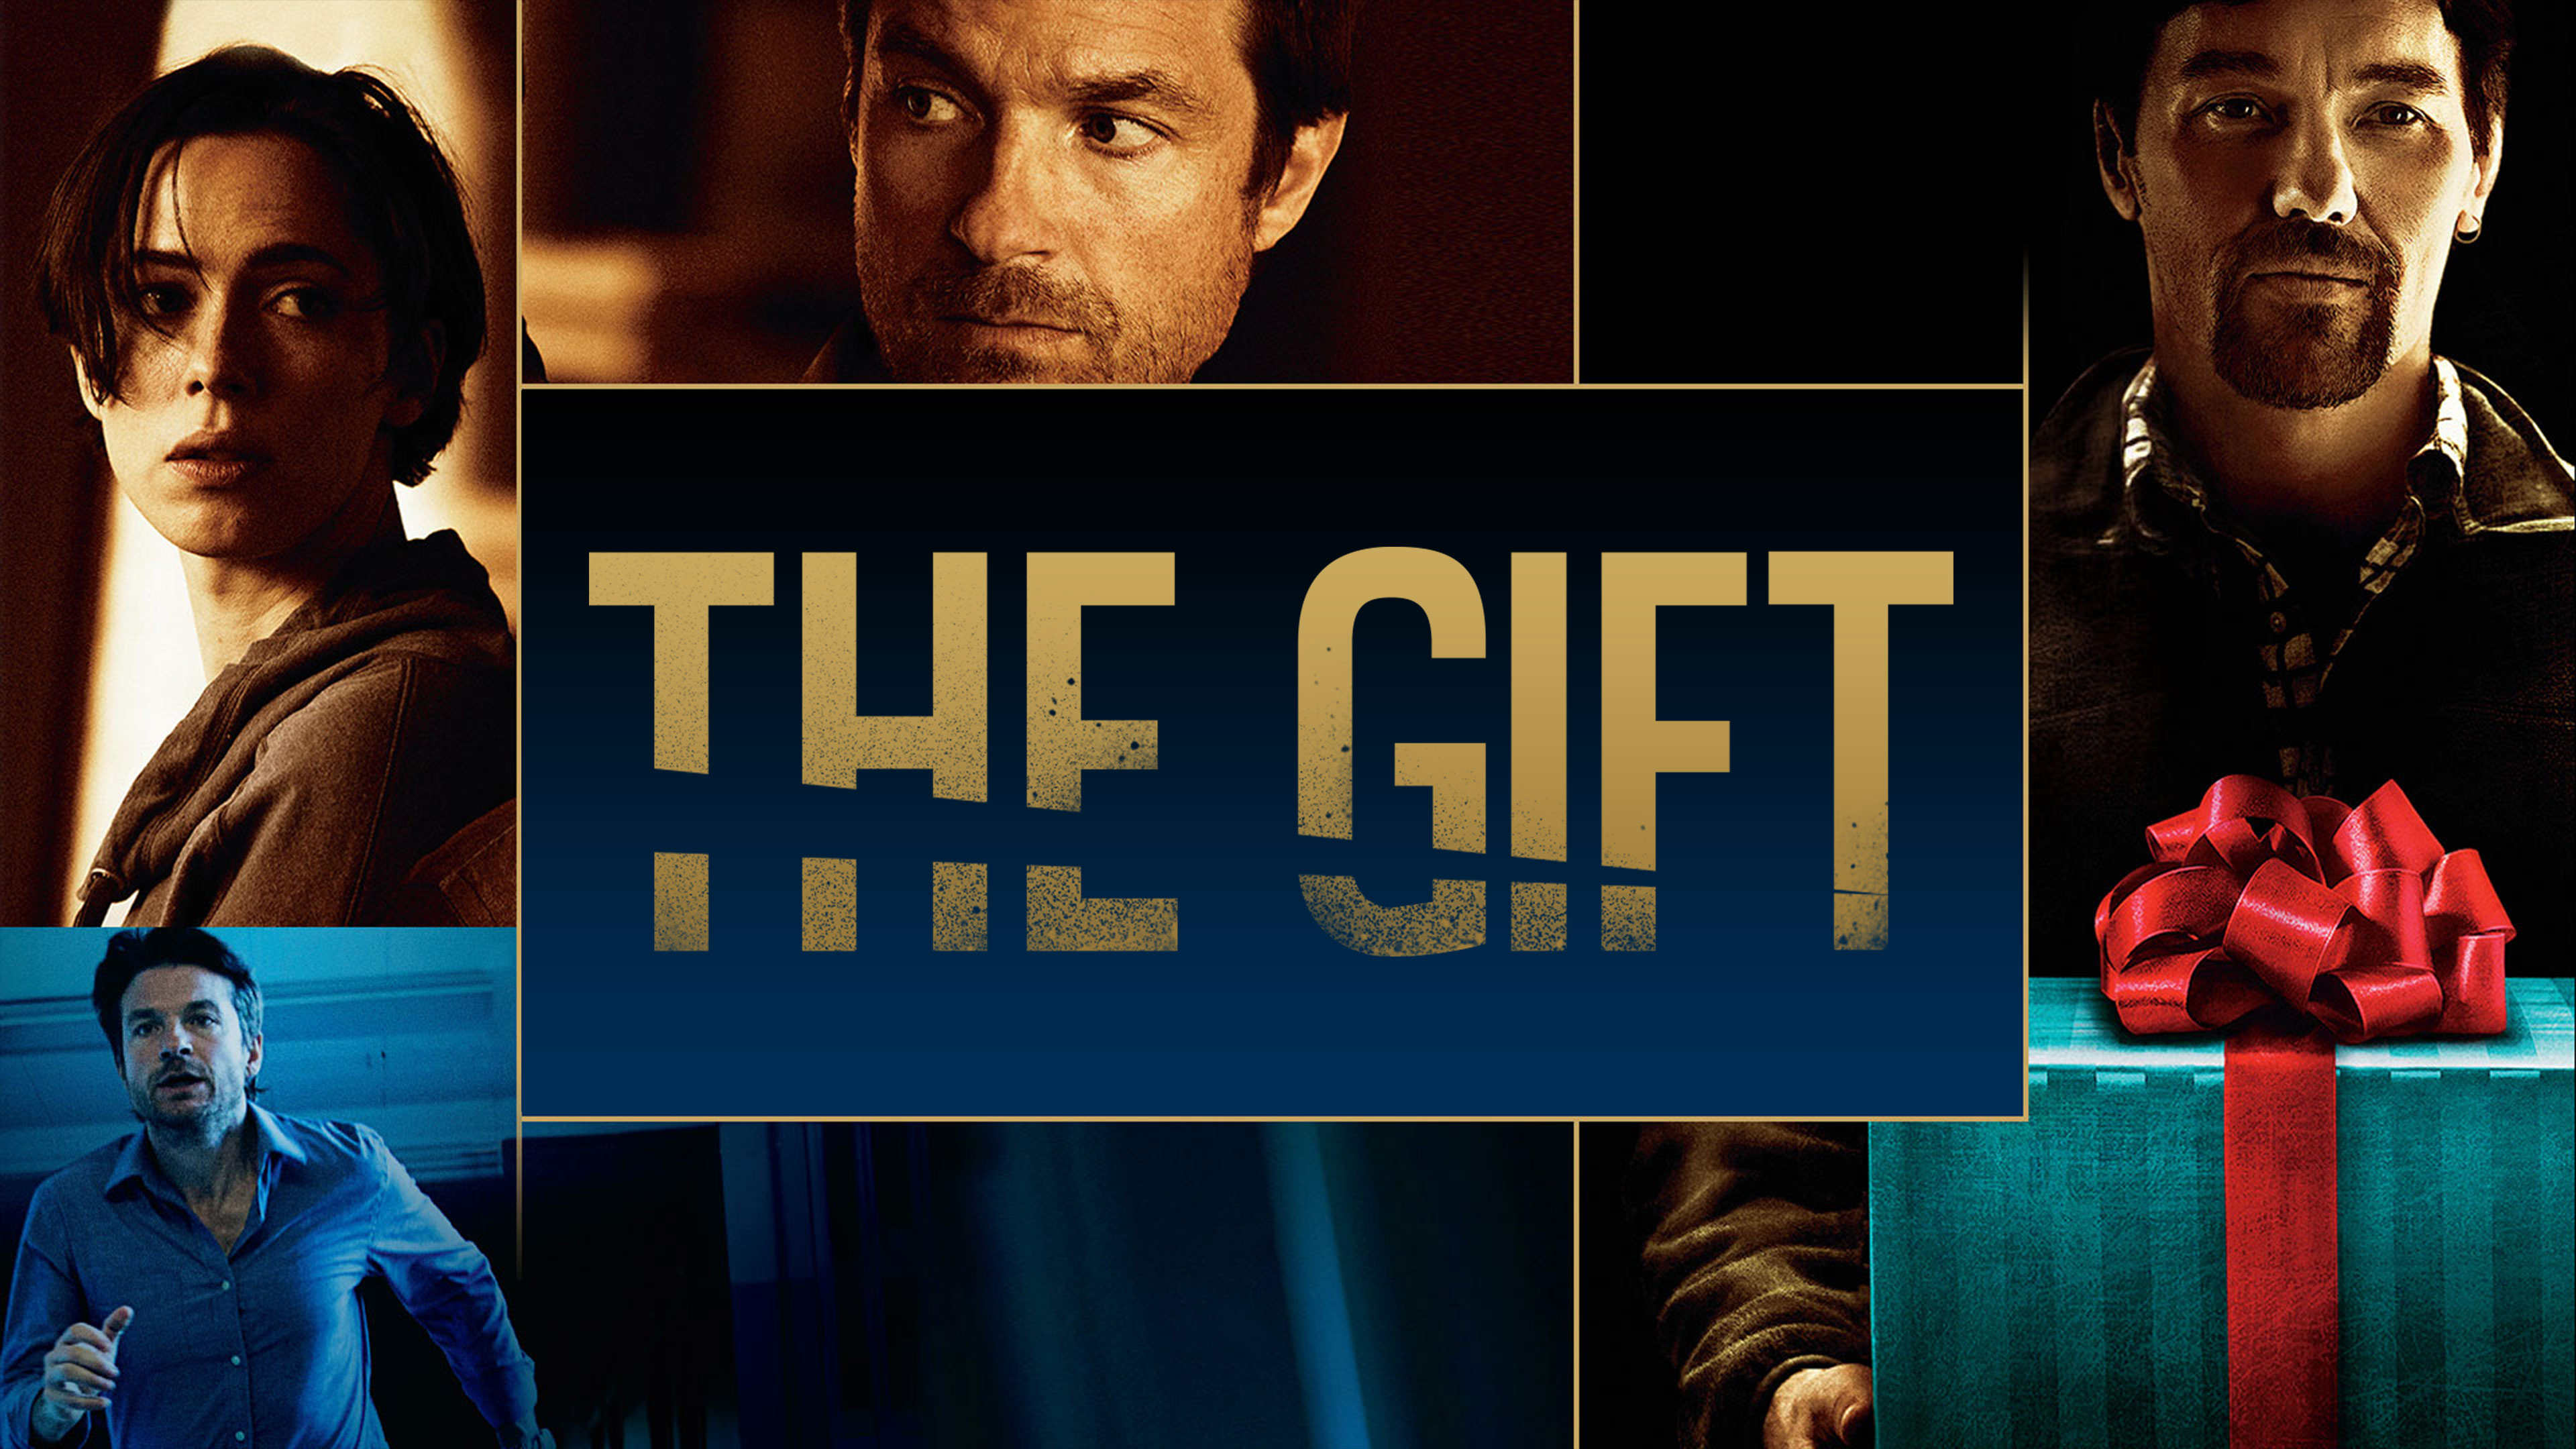 Watch The Gift Online | Stream Full Movies